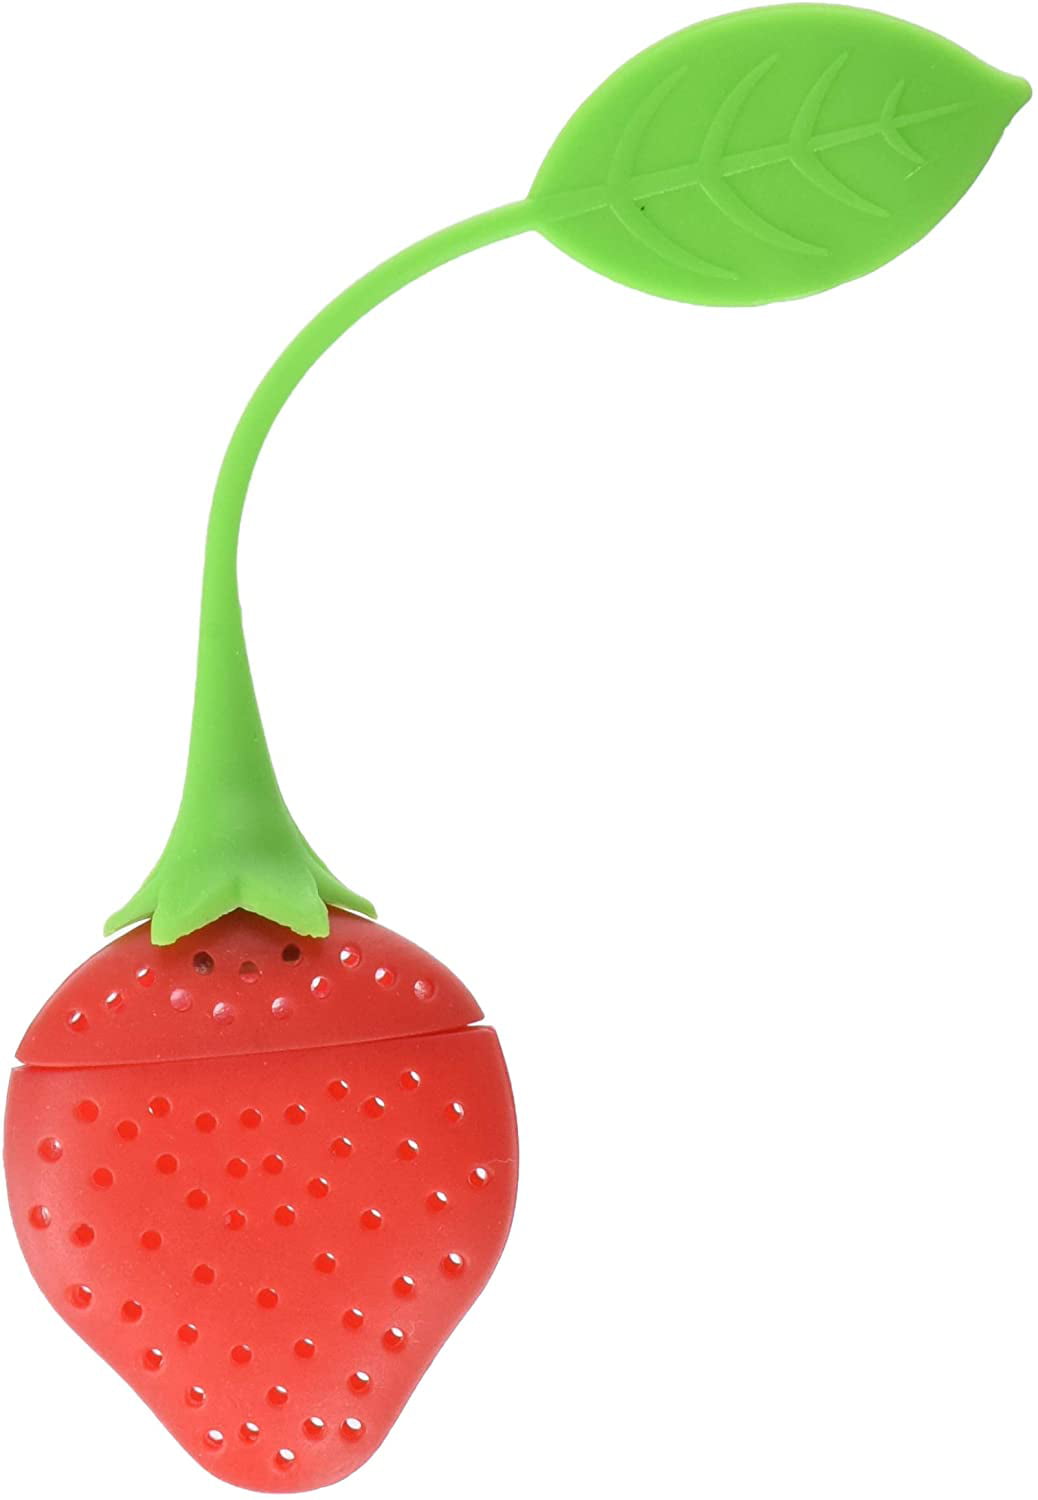 Red Enjoy Your Teatime with Cute Fruit Design Steeper Reusable Tea Strainer with Silicone Leaf Fennel Great Gift for Tea Lover. REDshield Strawberry Shape Tea Infuser 